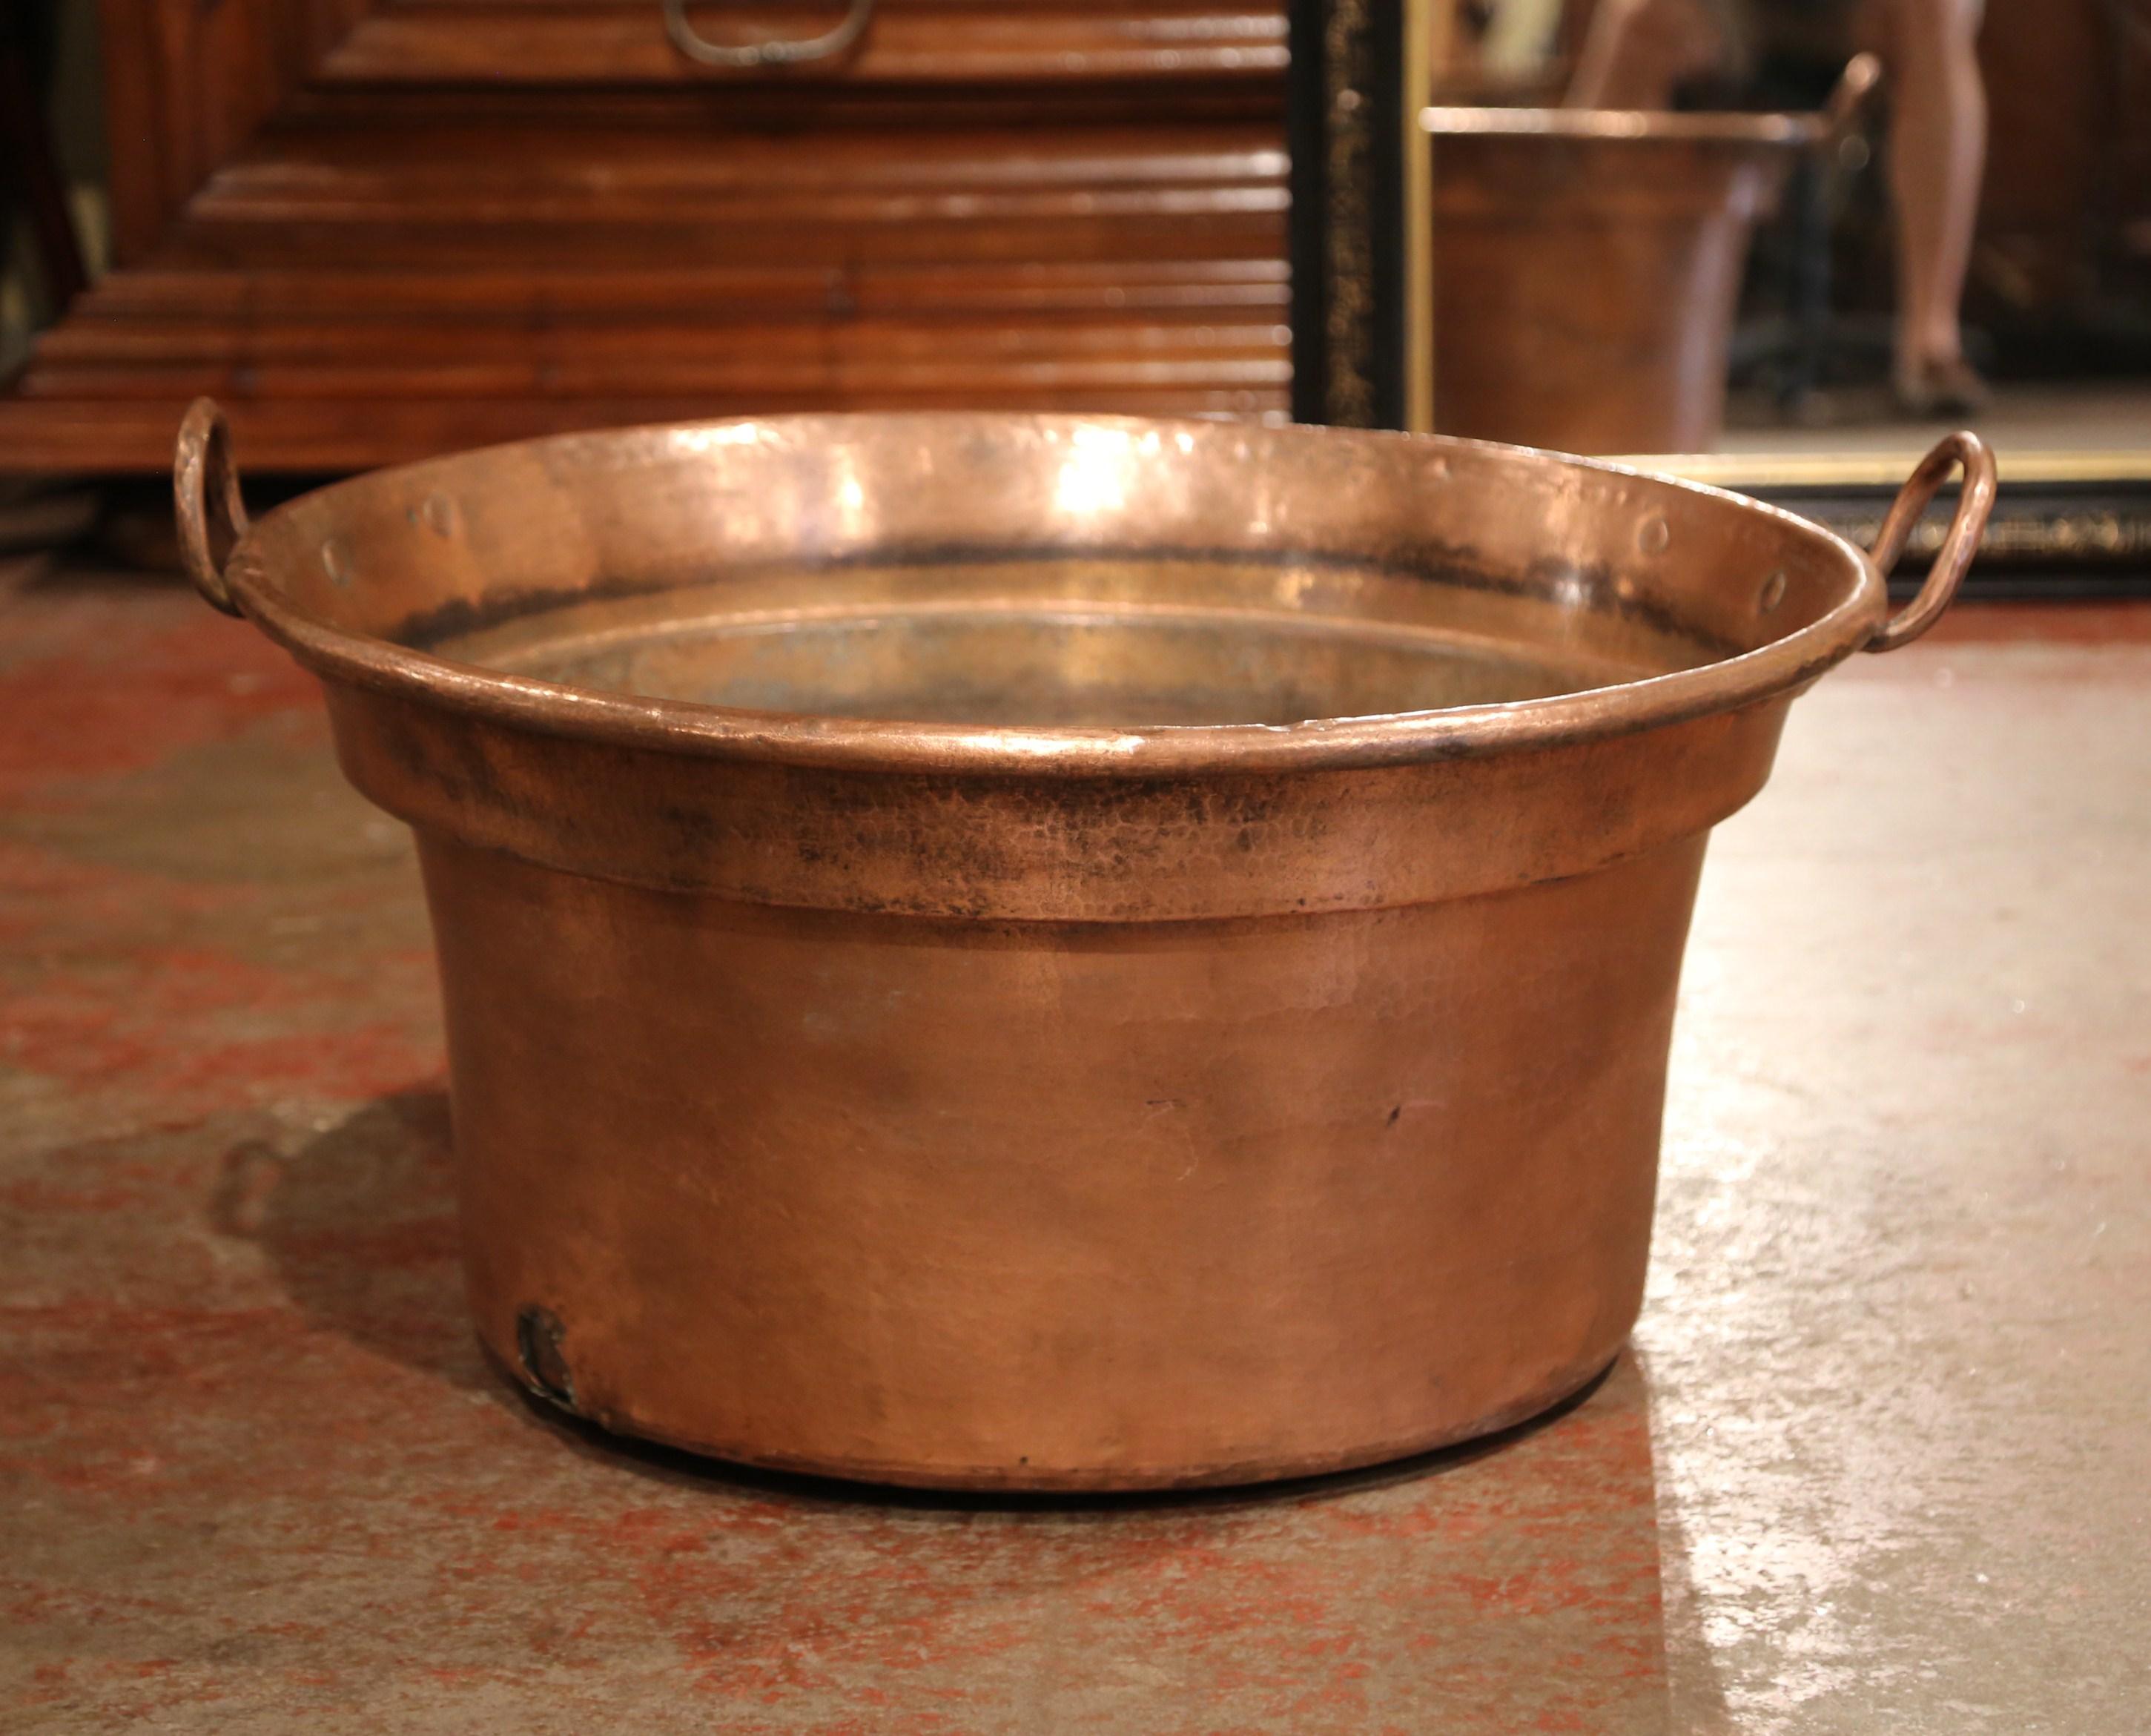 Keep your drinks cold in this important, antique, copper marmalade bowl! Crafted in Normandy, France, circa 1860, the large decorative“Bassine a Confiture”, or jelly bowl, is round in shape; it features two brass handles on the sides, which are